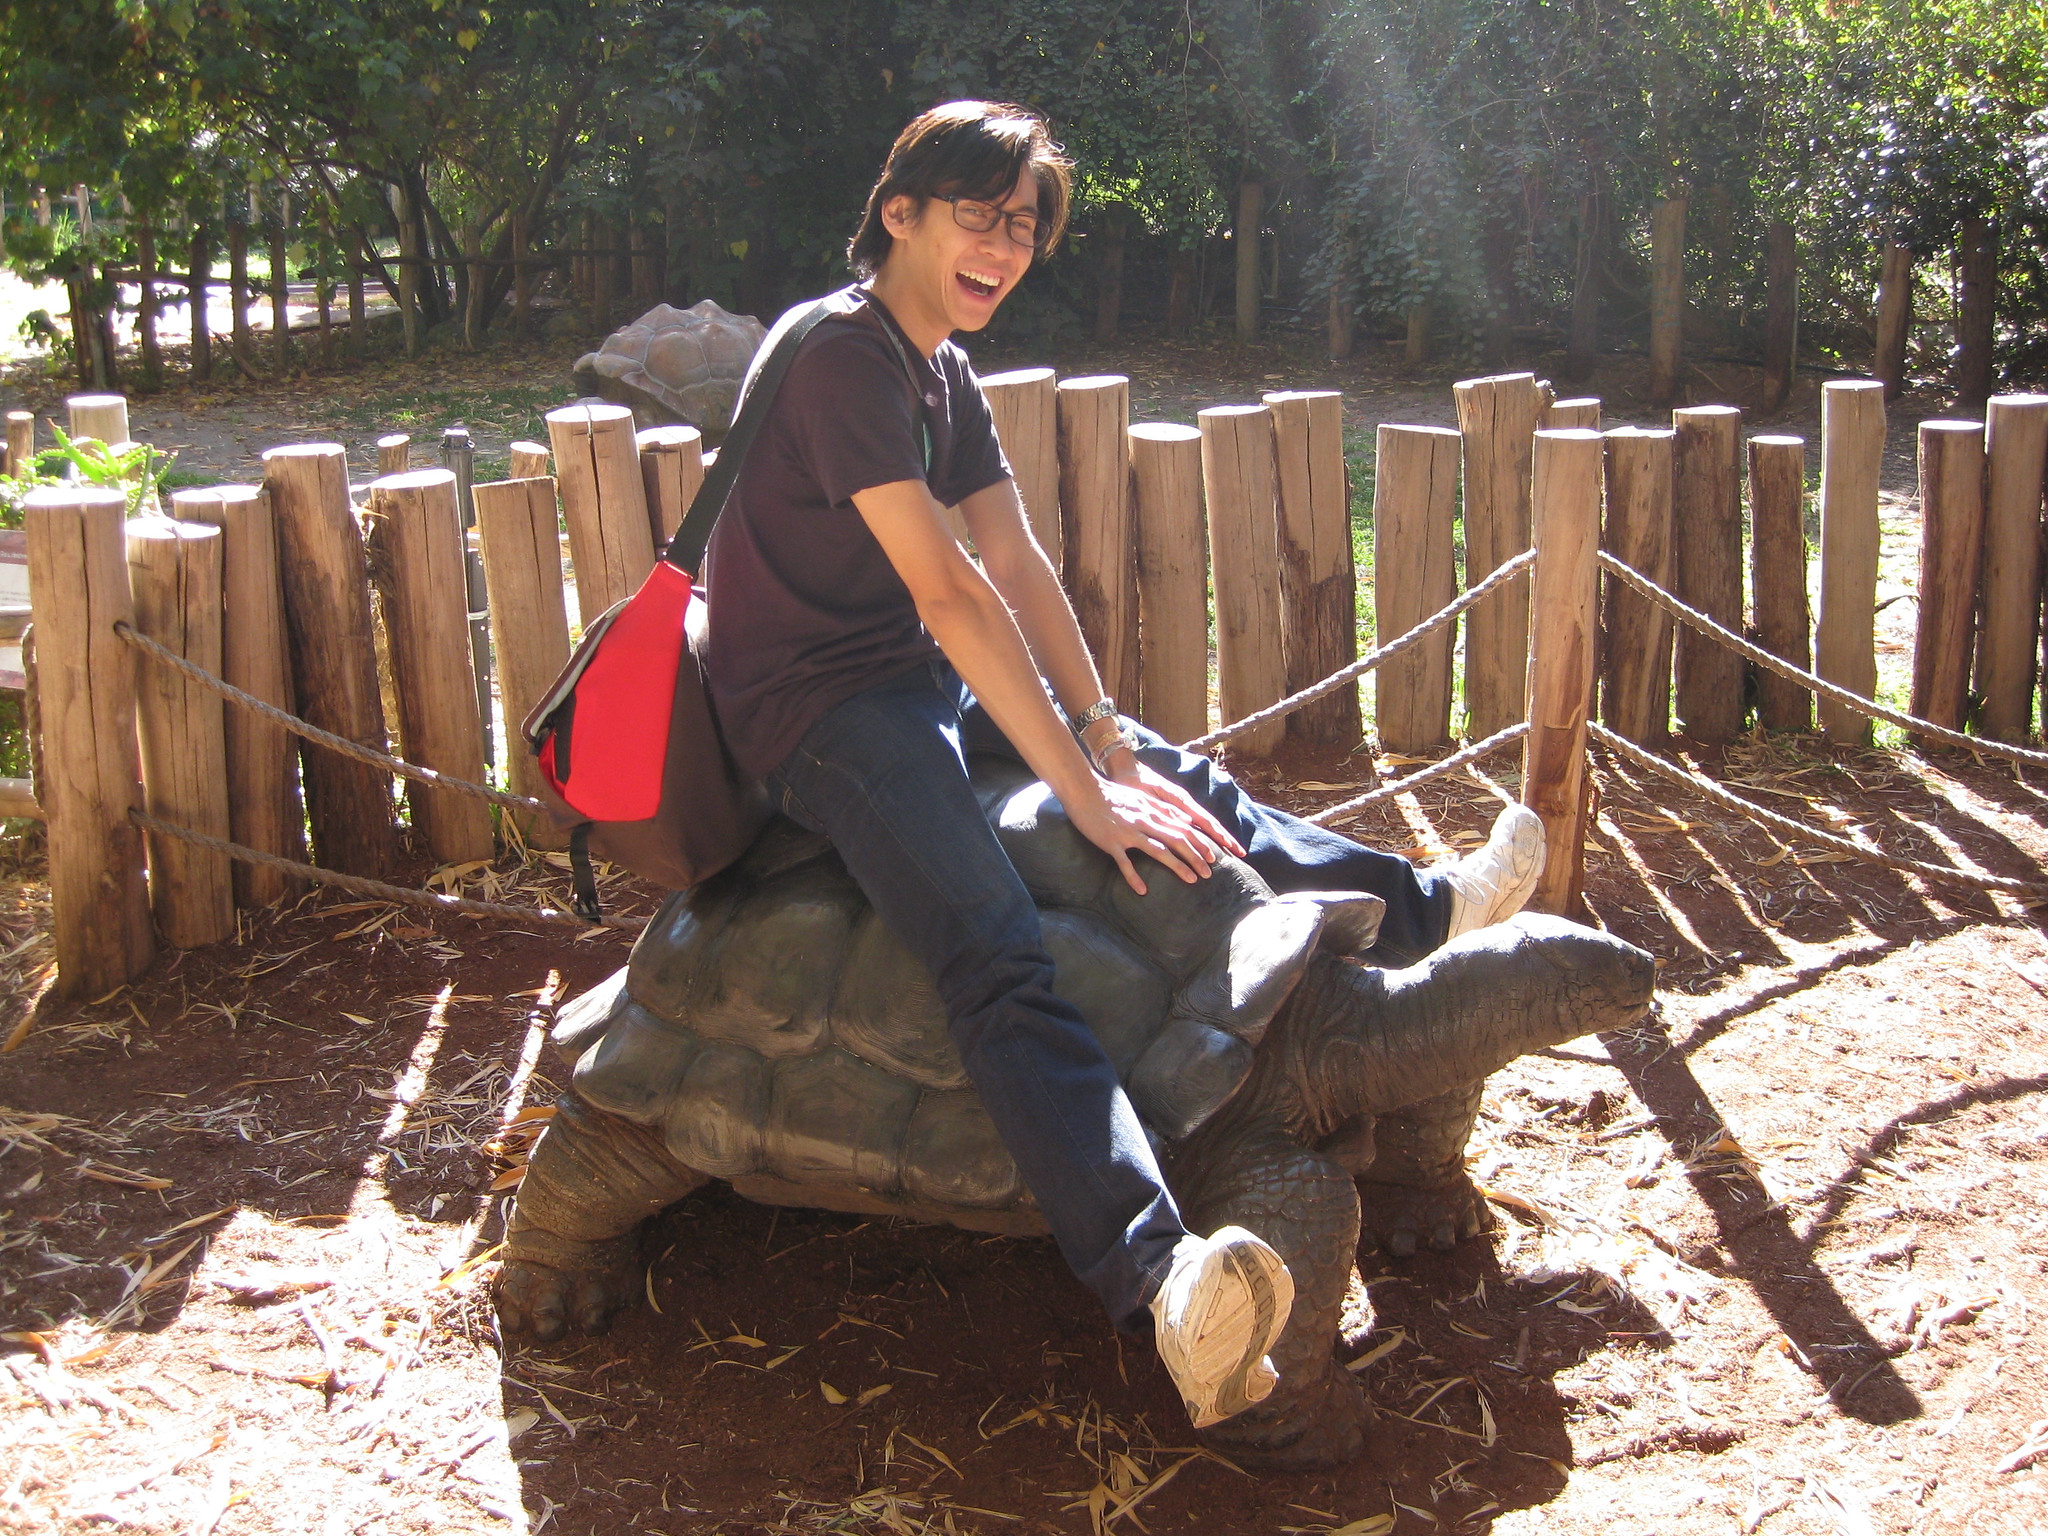 a man enthusiastically riding a gigantic tortoise in a sunny day at fenced lot of zootastic, one of the best things to do in charlotte, nc